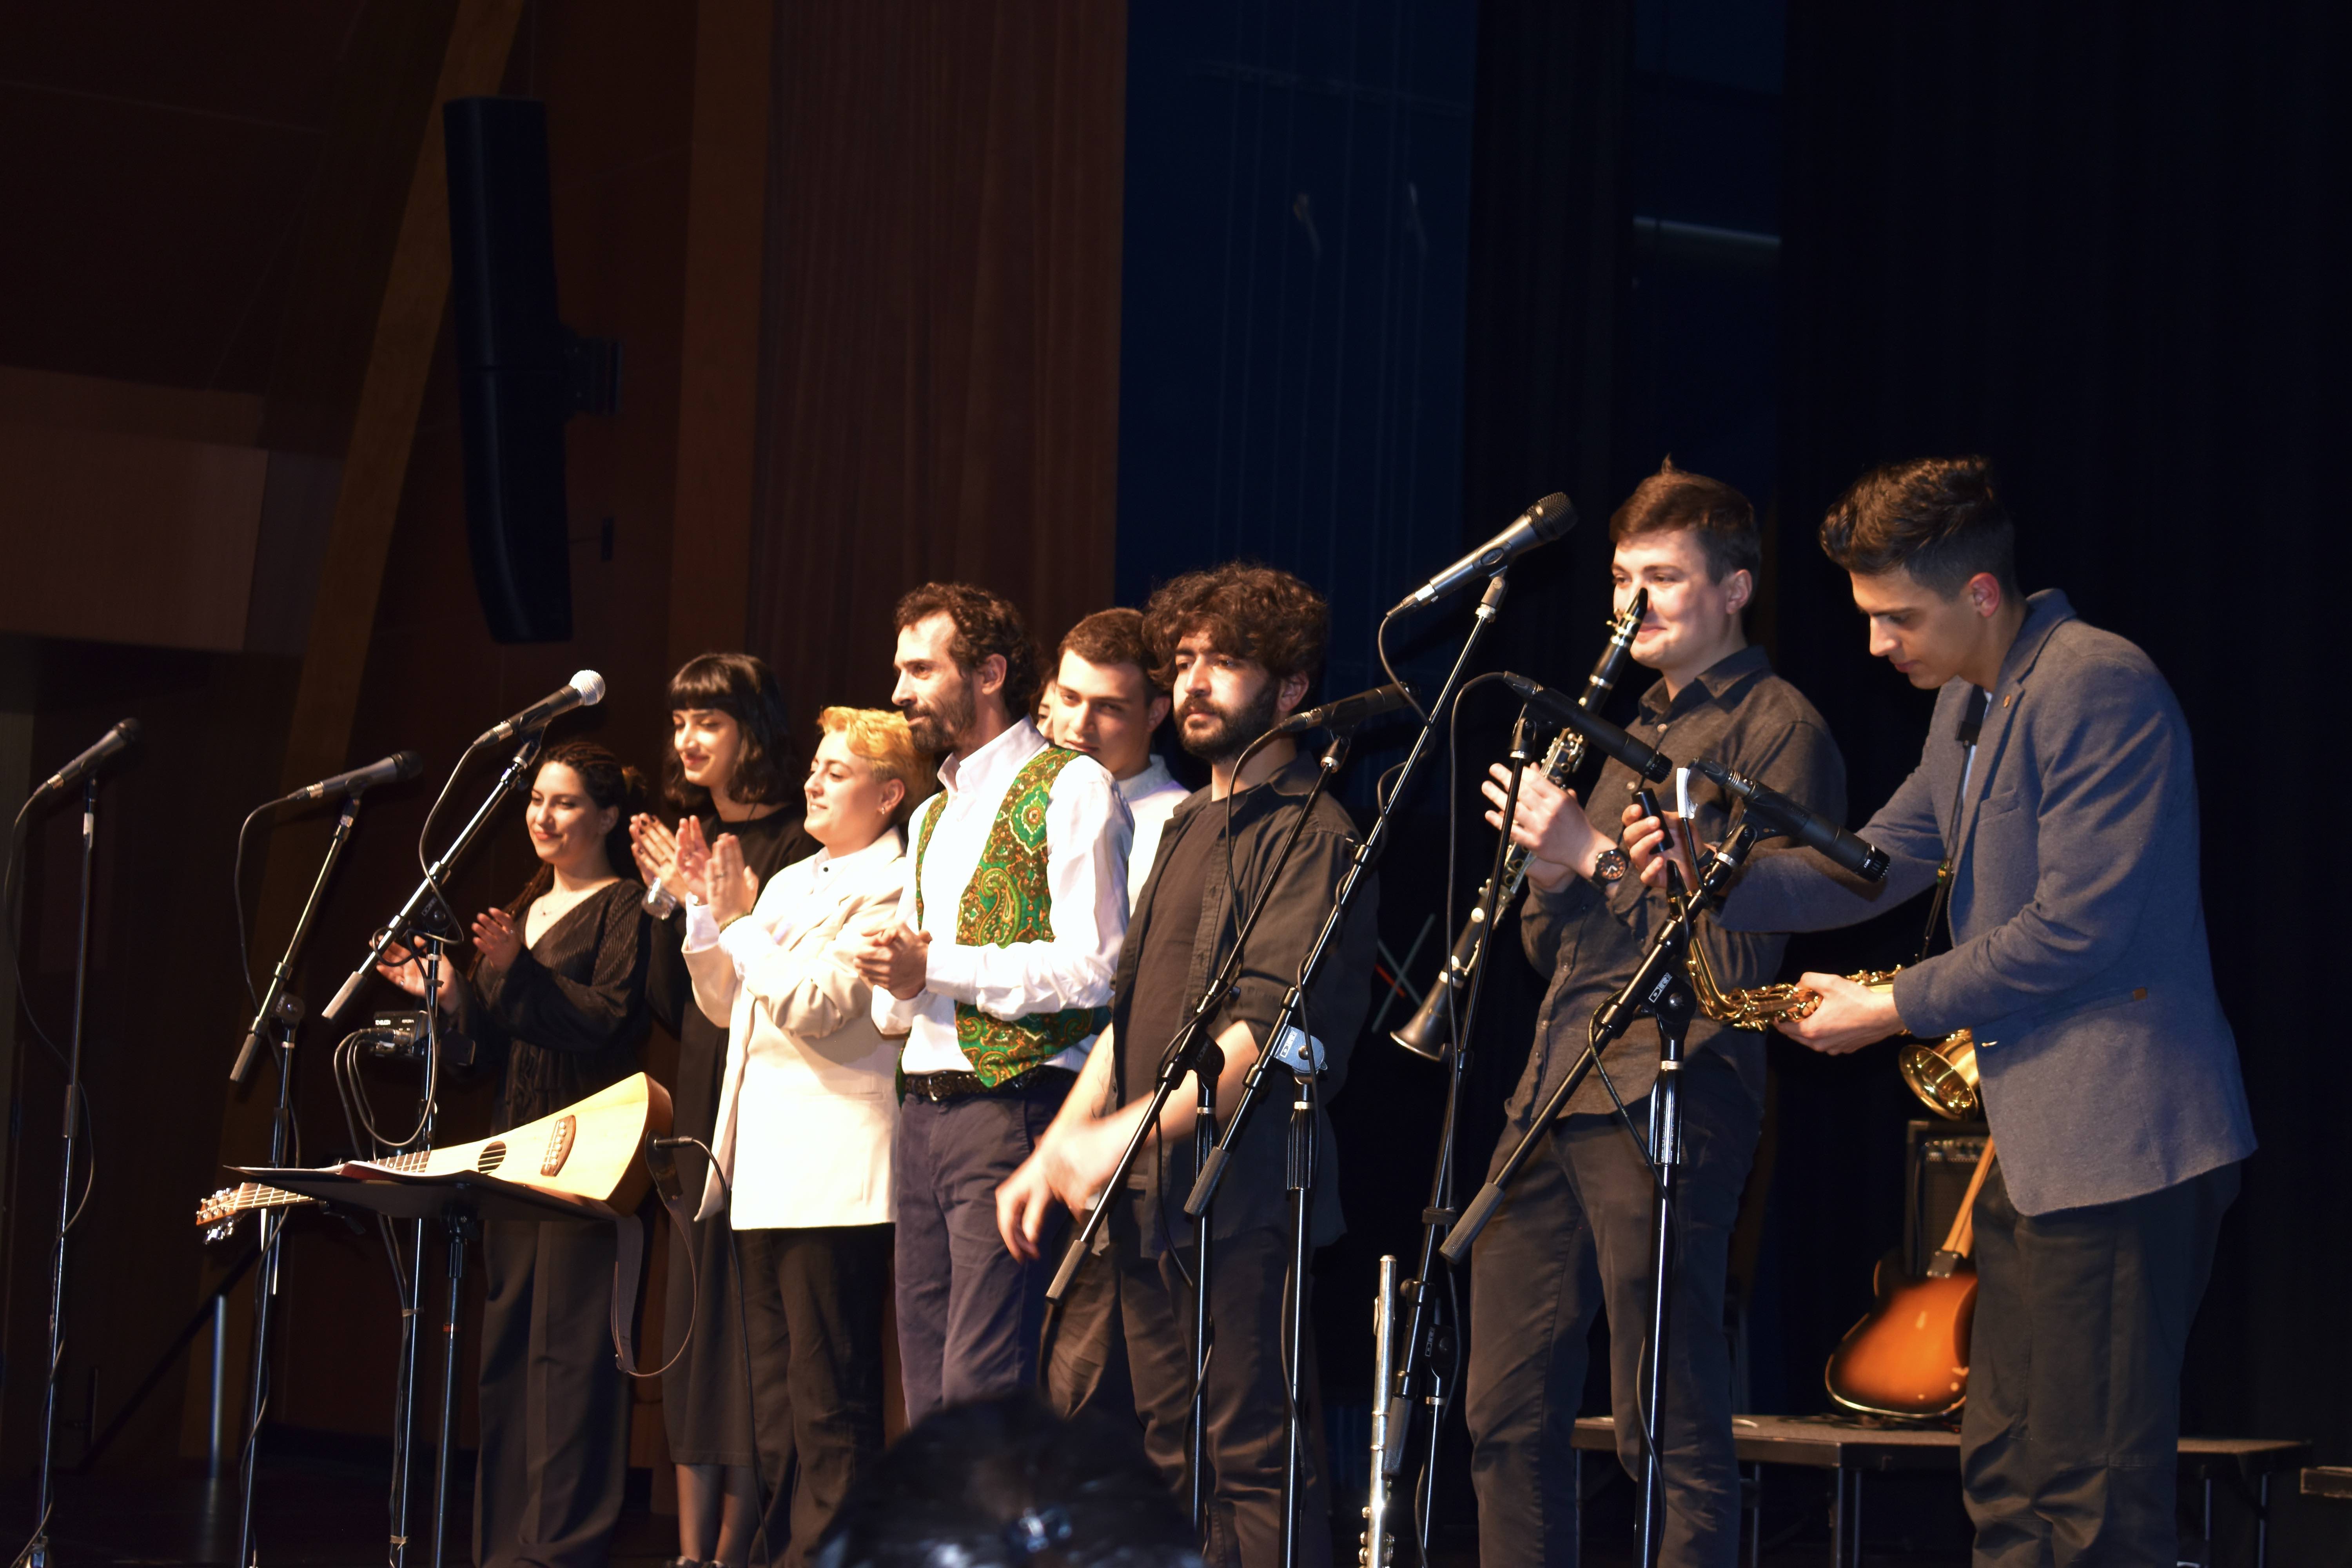 From Armenia to LA: TmbaTa Orchestra greeted with packed house and standing ovation